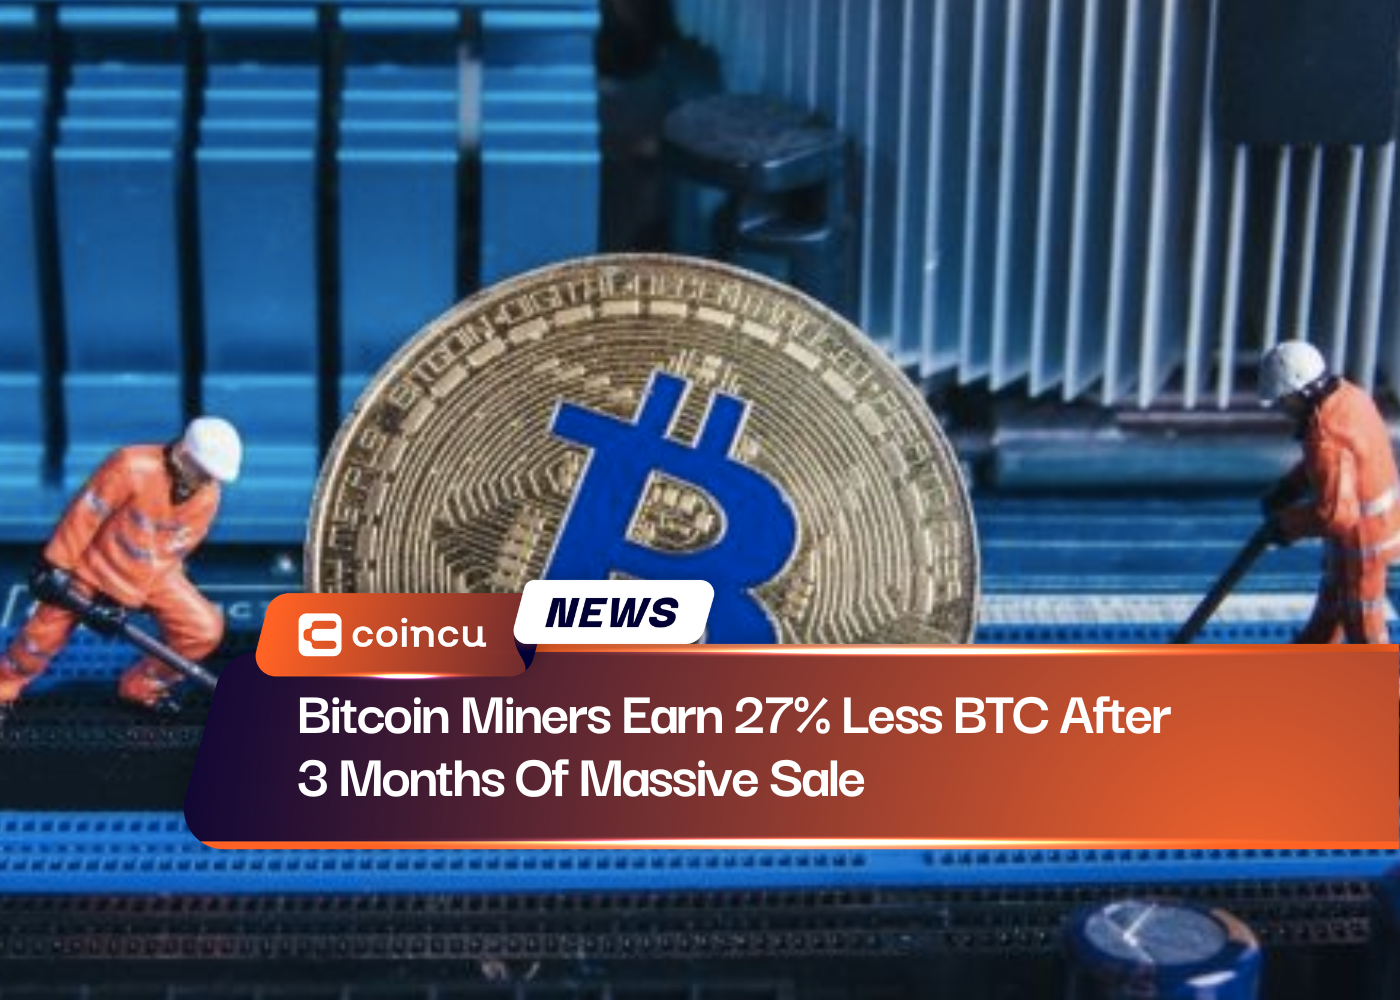 Bitcoin Miners Earn 27% Less BTC After 3 Months Of Massive Sale